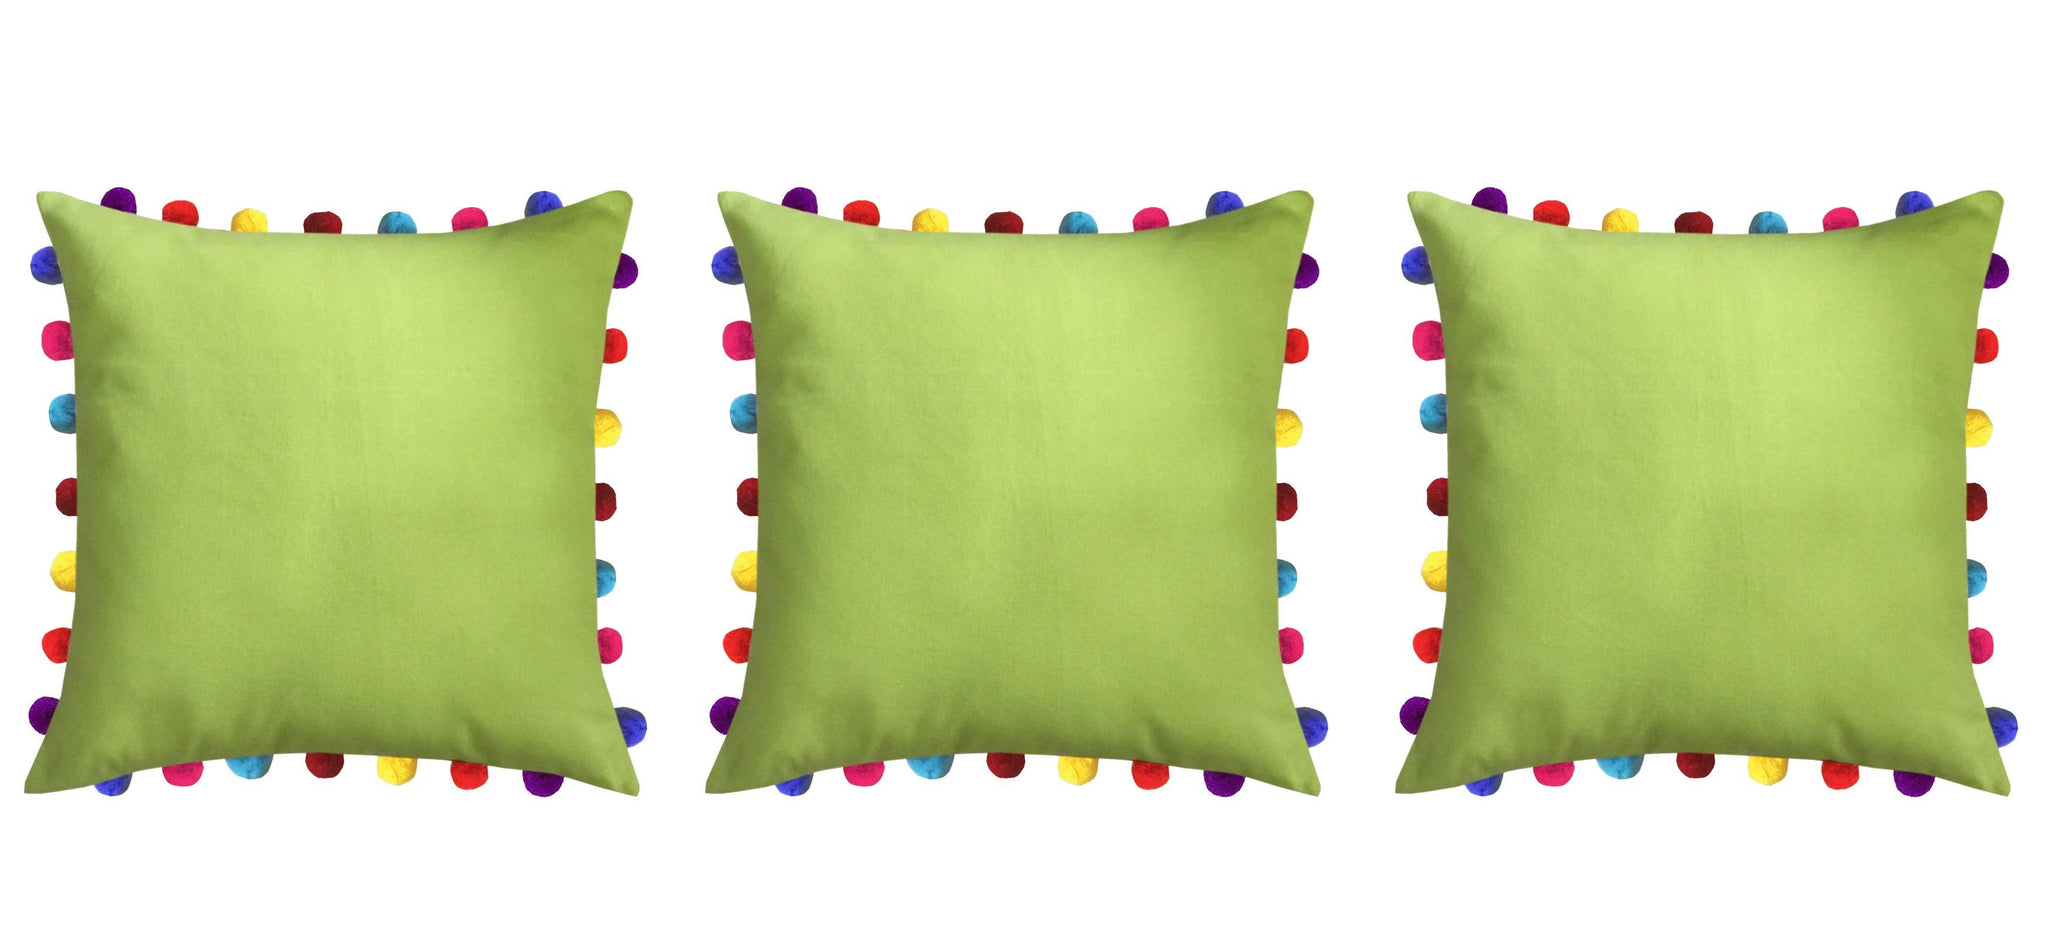 Lushomes Palm Cushion Cover with Colorful Pom Poms (3 pcs, 20 x 20”) - Lushomes